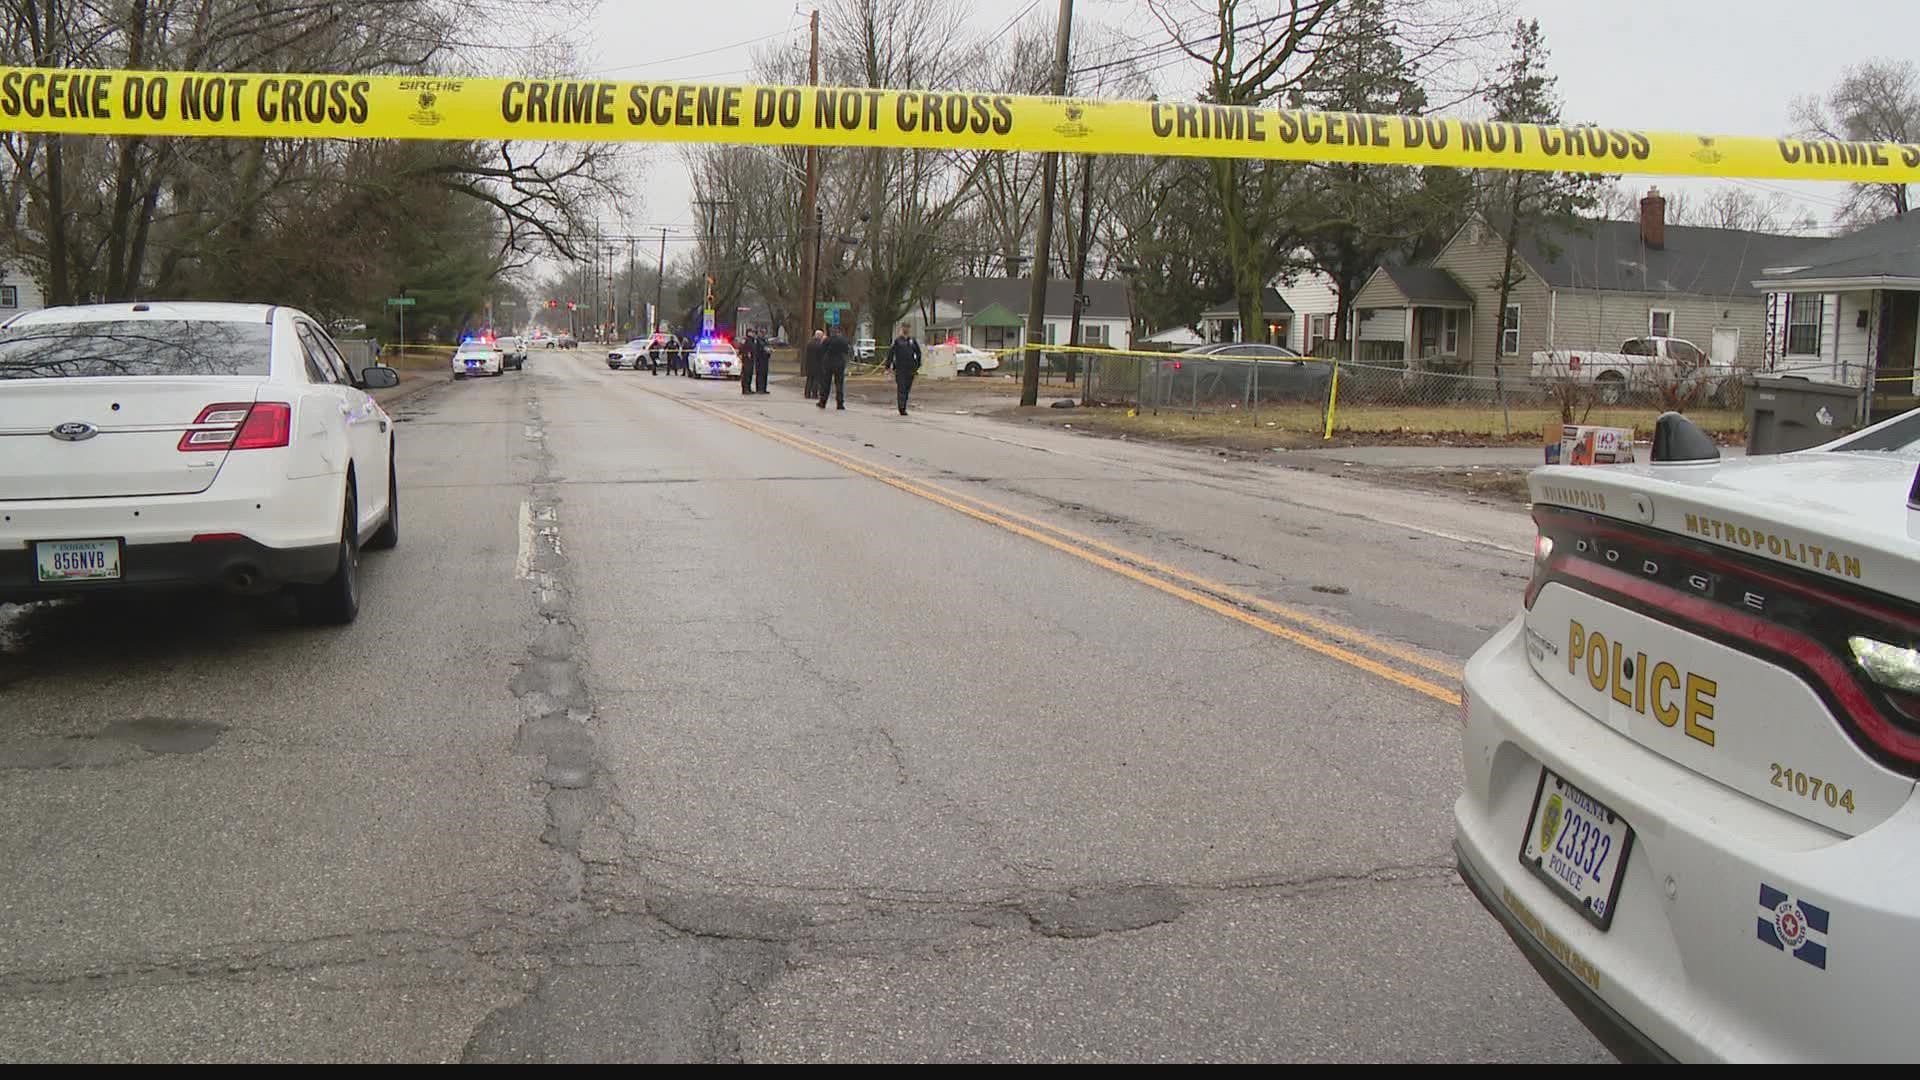 Police said the shooting happened around 12 p.m. Tuesday near 34th and Baltimore Avenue.